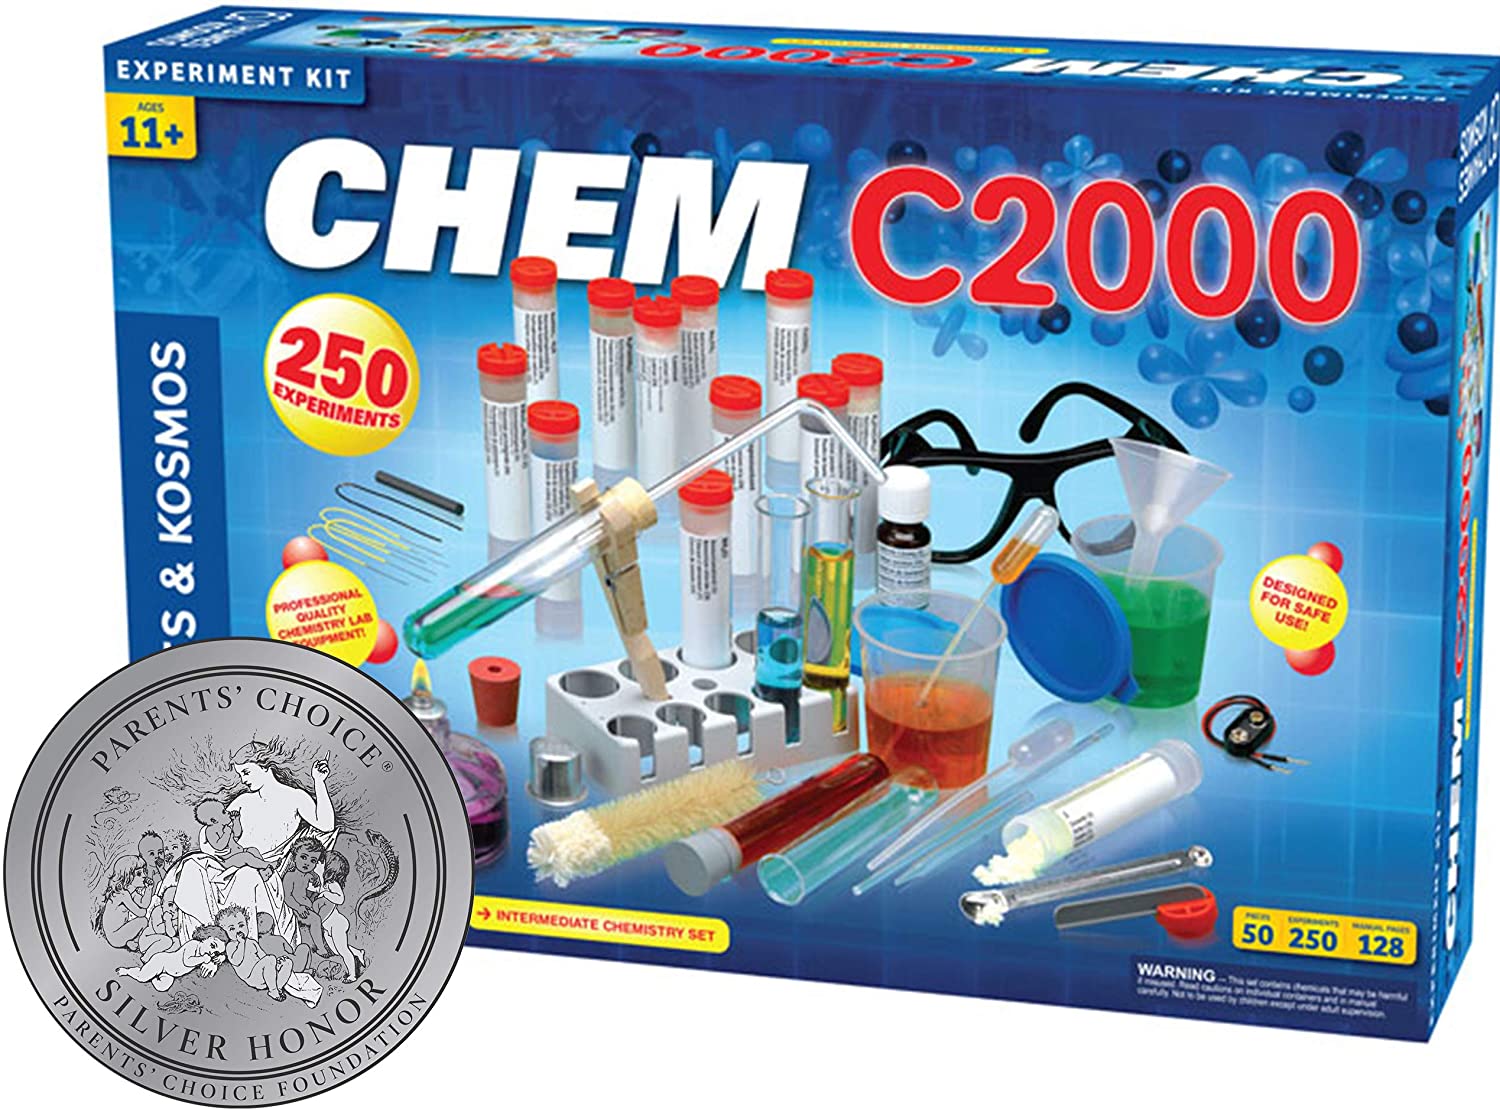 Thames & Kosmos Chem C2000 (V 2.0) Chemistry Set with 250 Experiments and 128 Page Lab Manual, Student Laboratory Quality Instruments & Chemicals